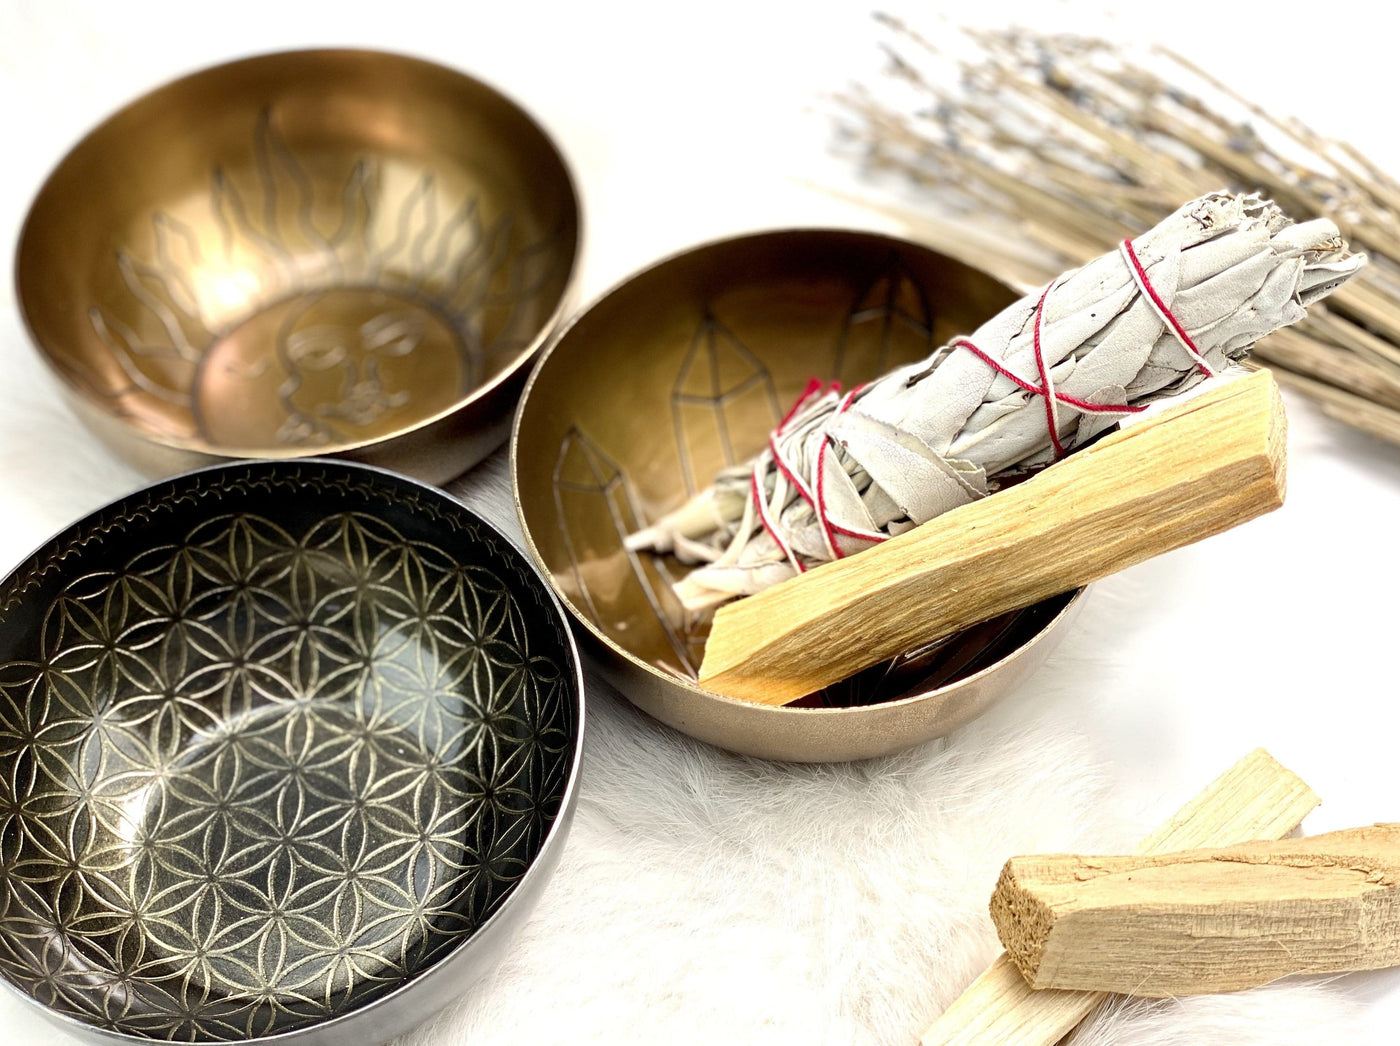 Products Offering Bowl Brass - 3 bowls with sage stick and palo santo